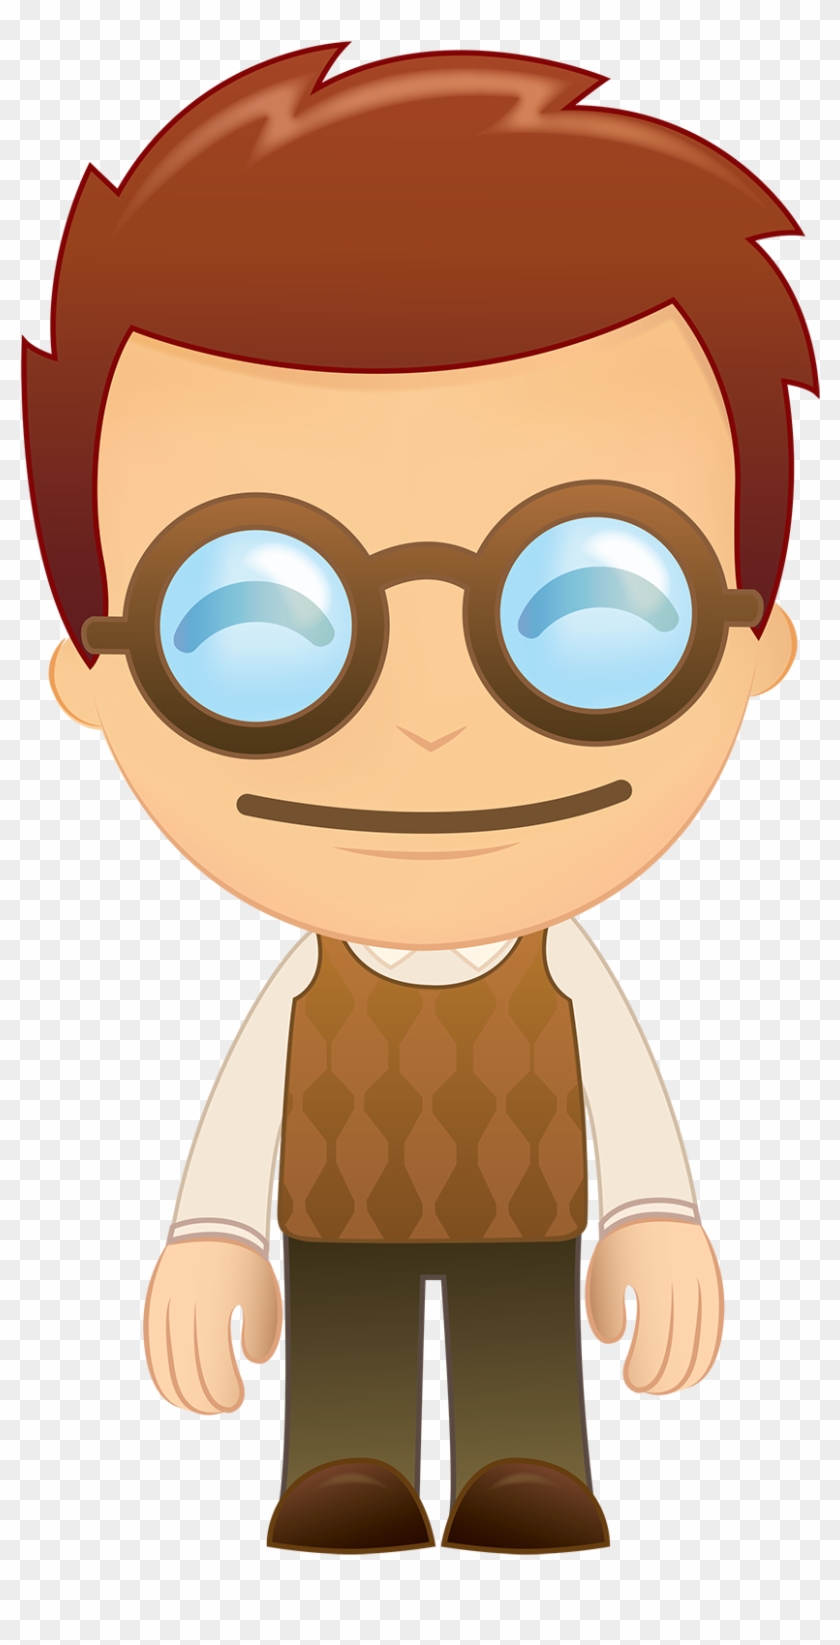 Cartoon Boy By Navdbest On Clipart Library - Cartoon Boy With Glasses #319673